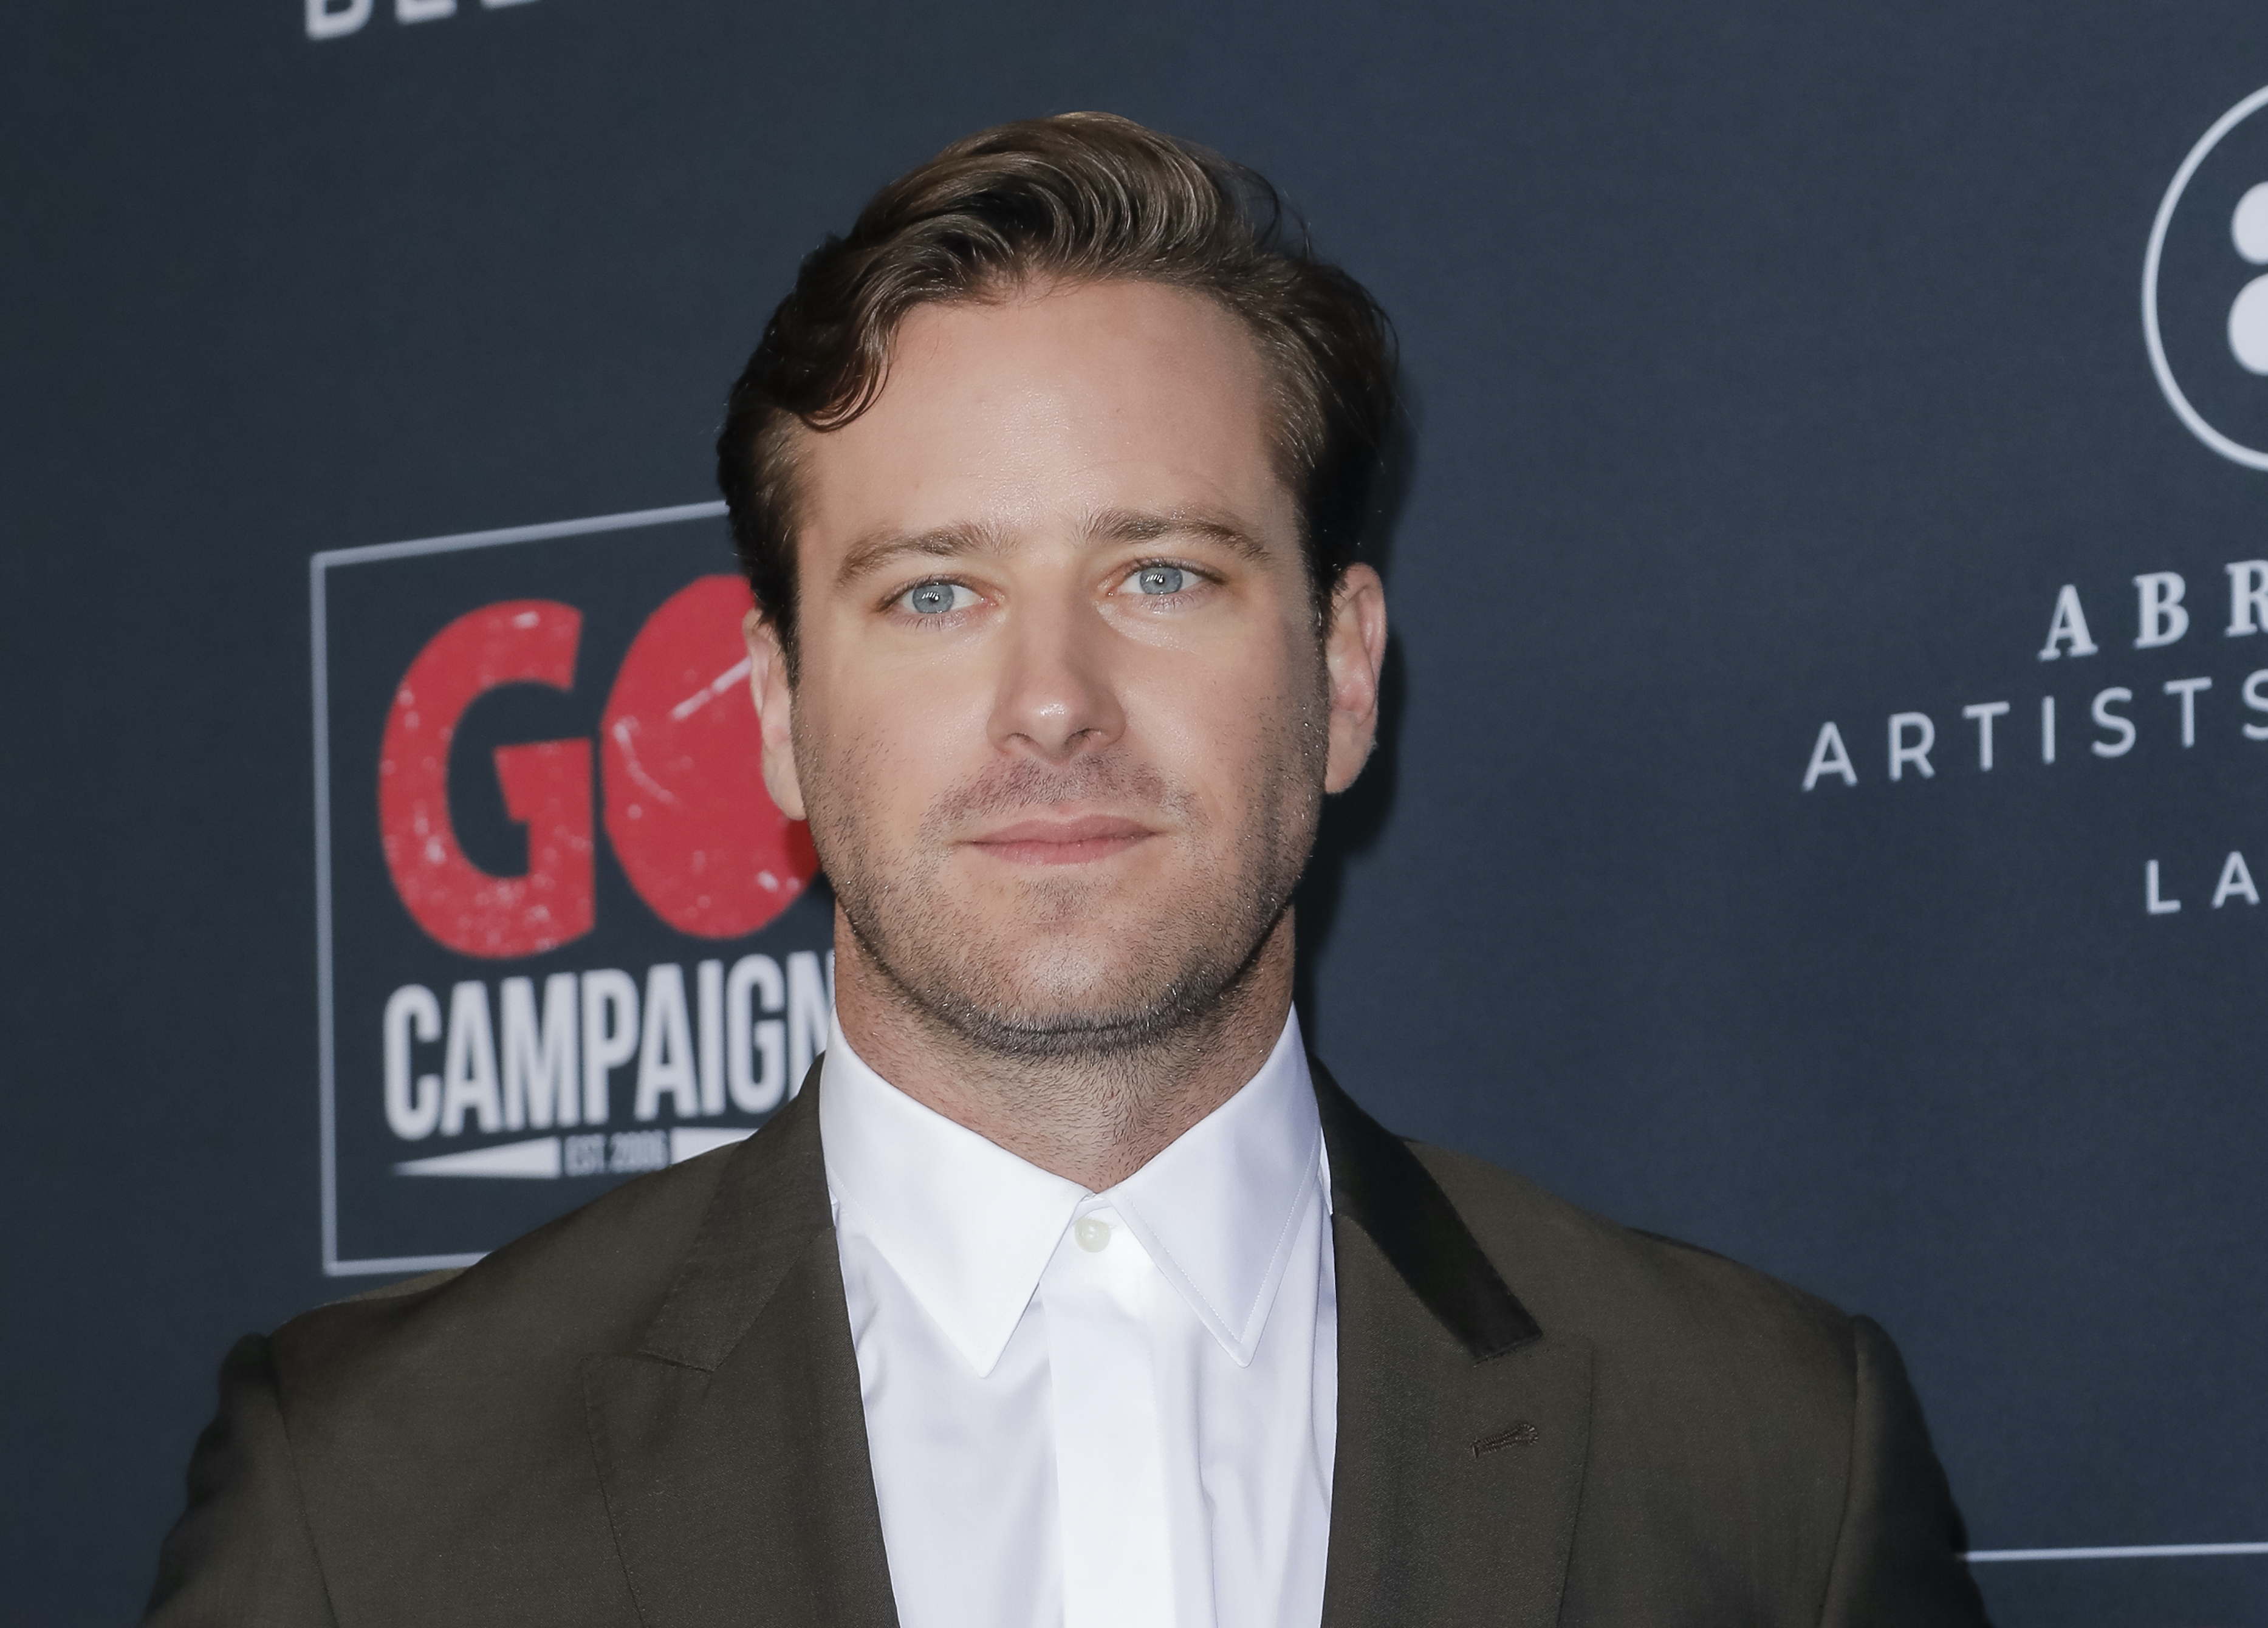 Armie Hammer attends the Go Campaign's 13th annual gala